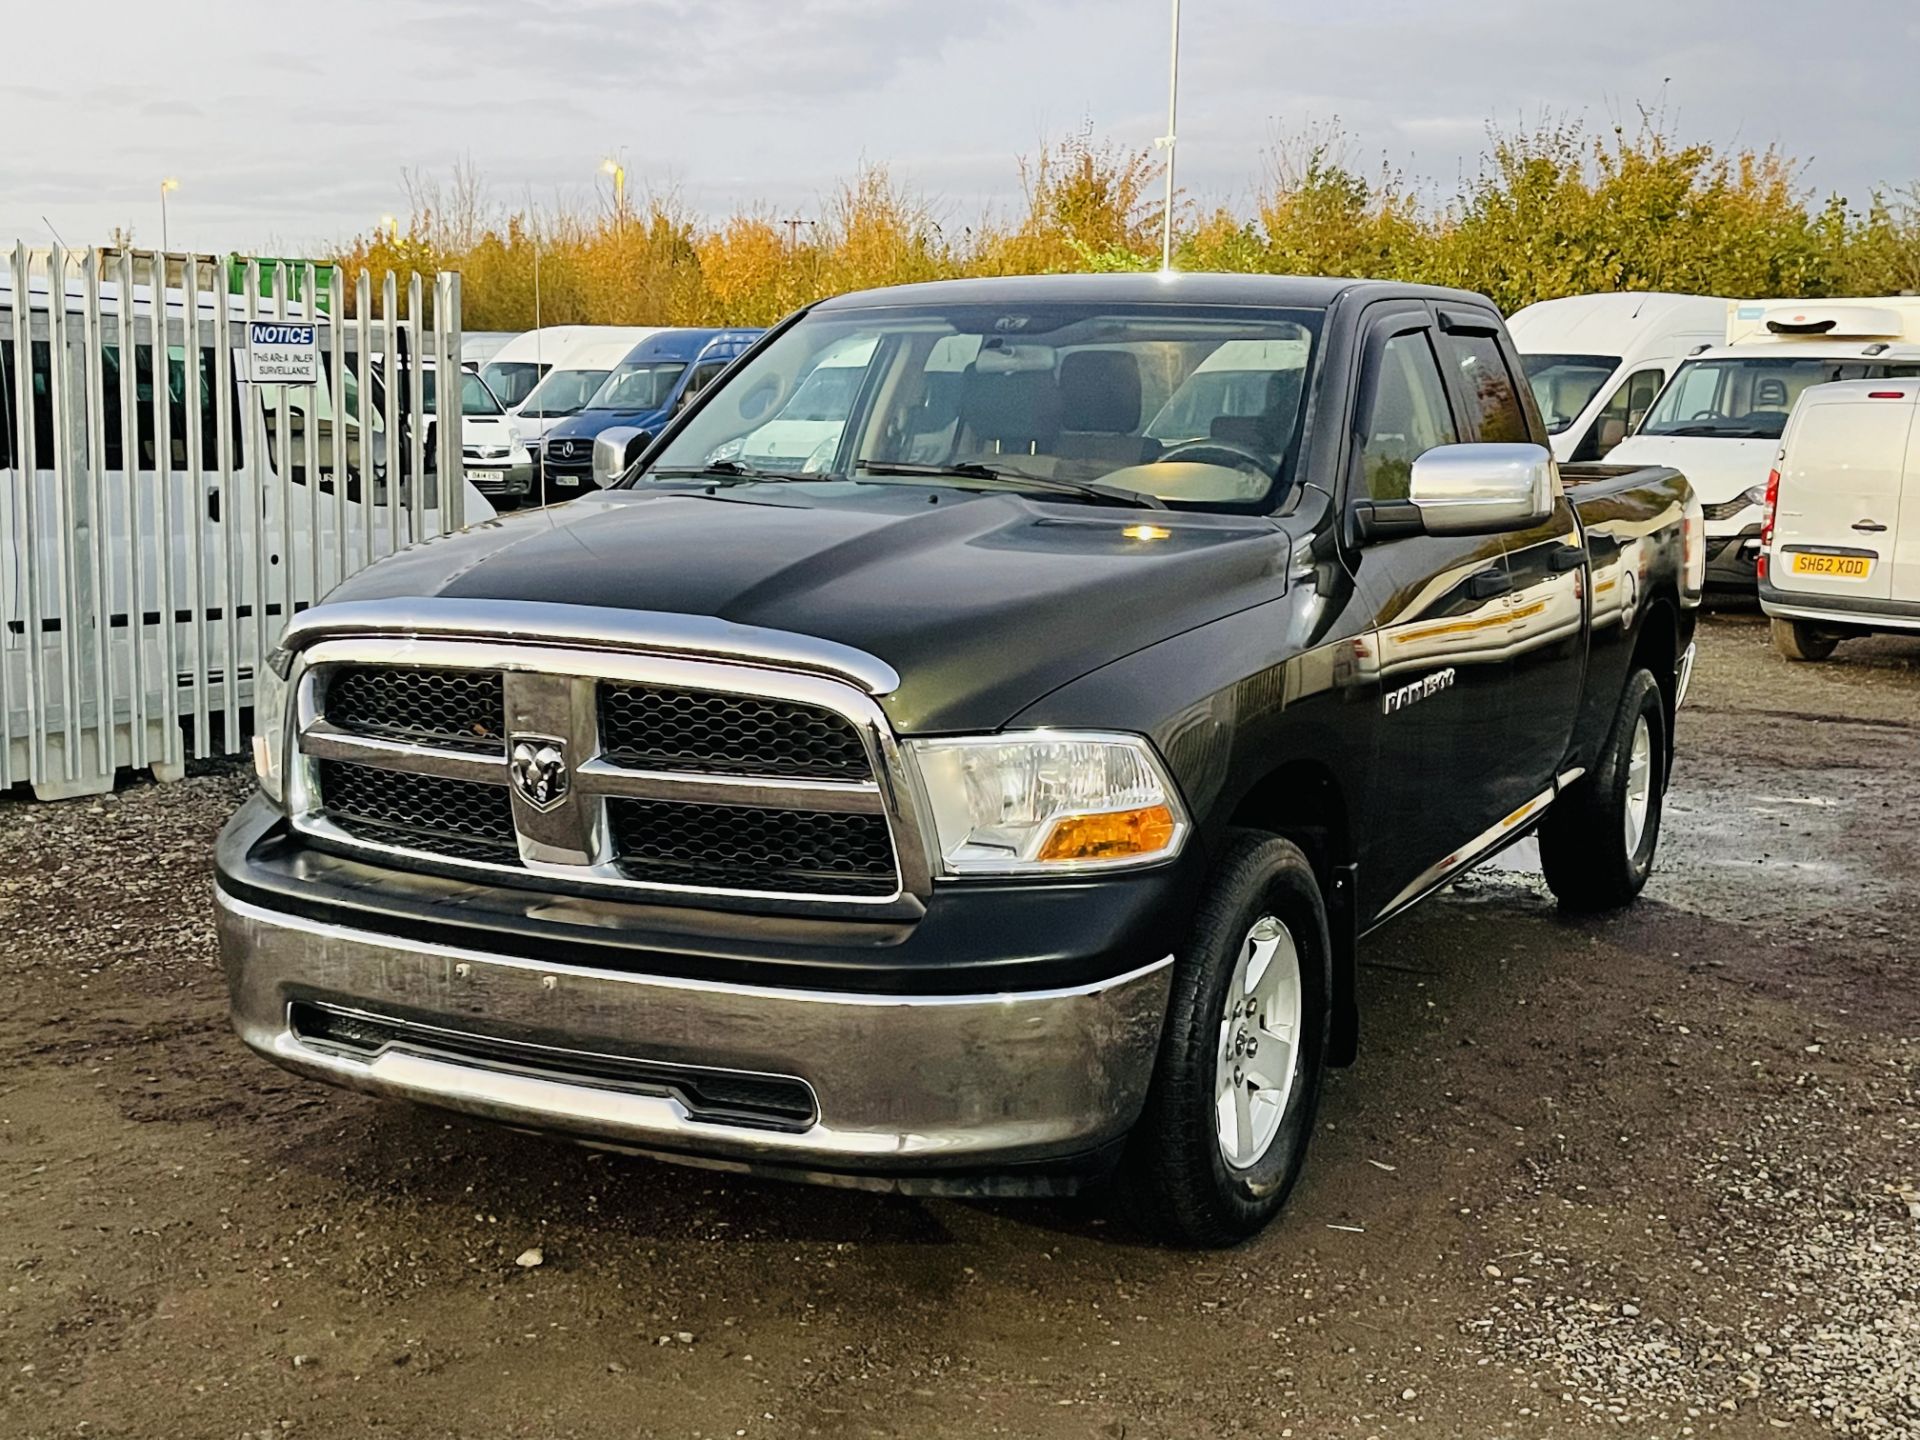 ** ON SALE **Dodge Ram 4.7 V8 1500 ST 4WD ' 2012 Year ' A/C - Cruise Control - 6 Seats Chrome Pack - Image 2 of 27